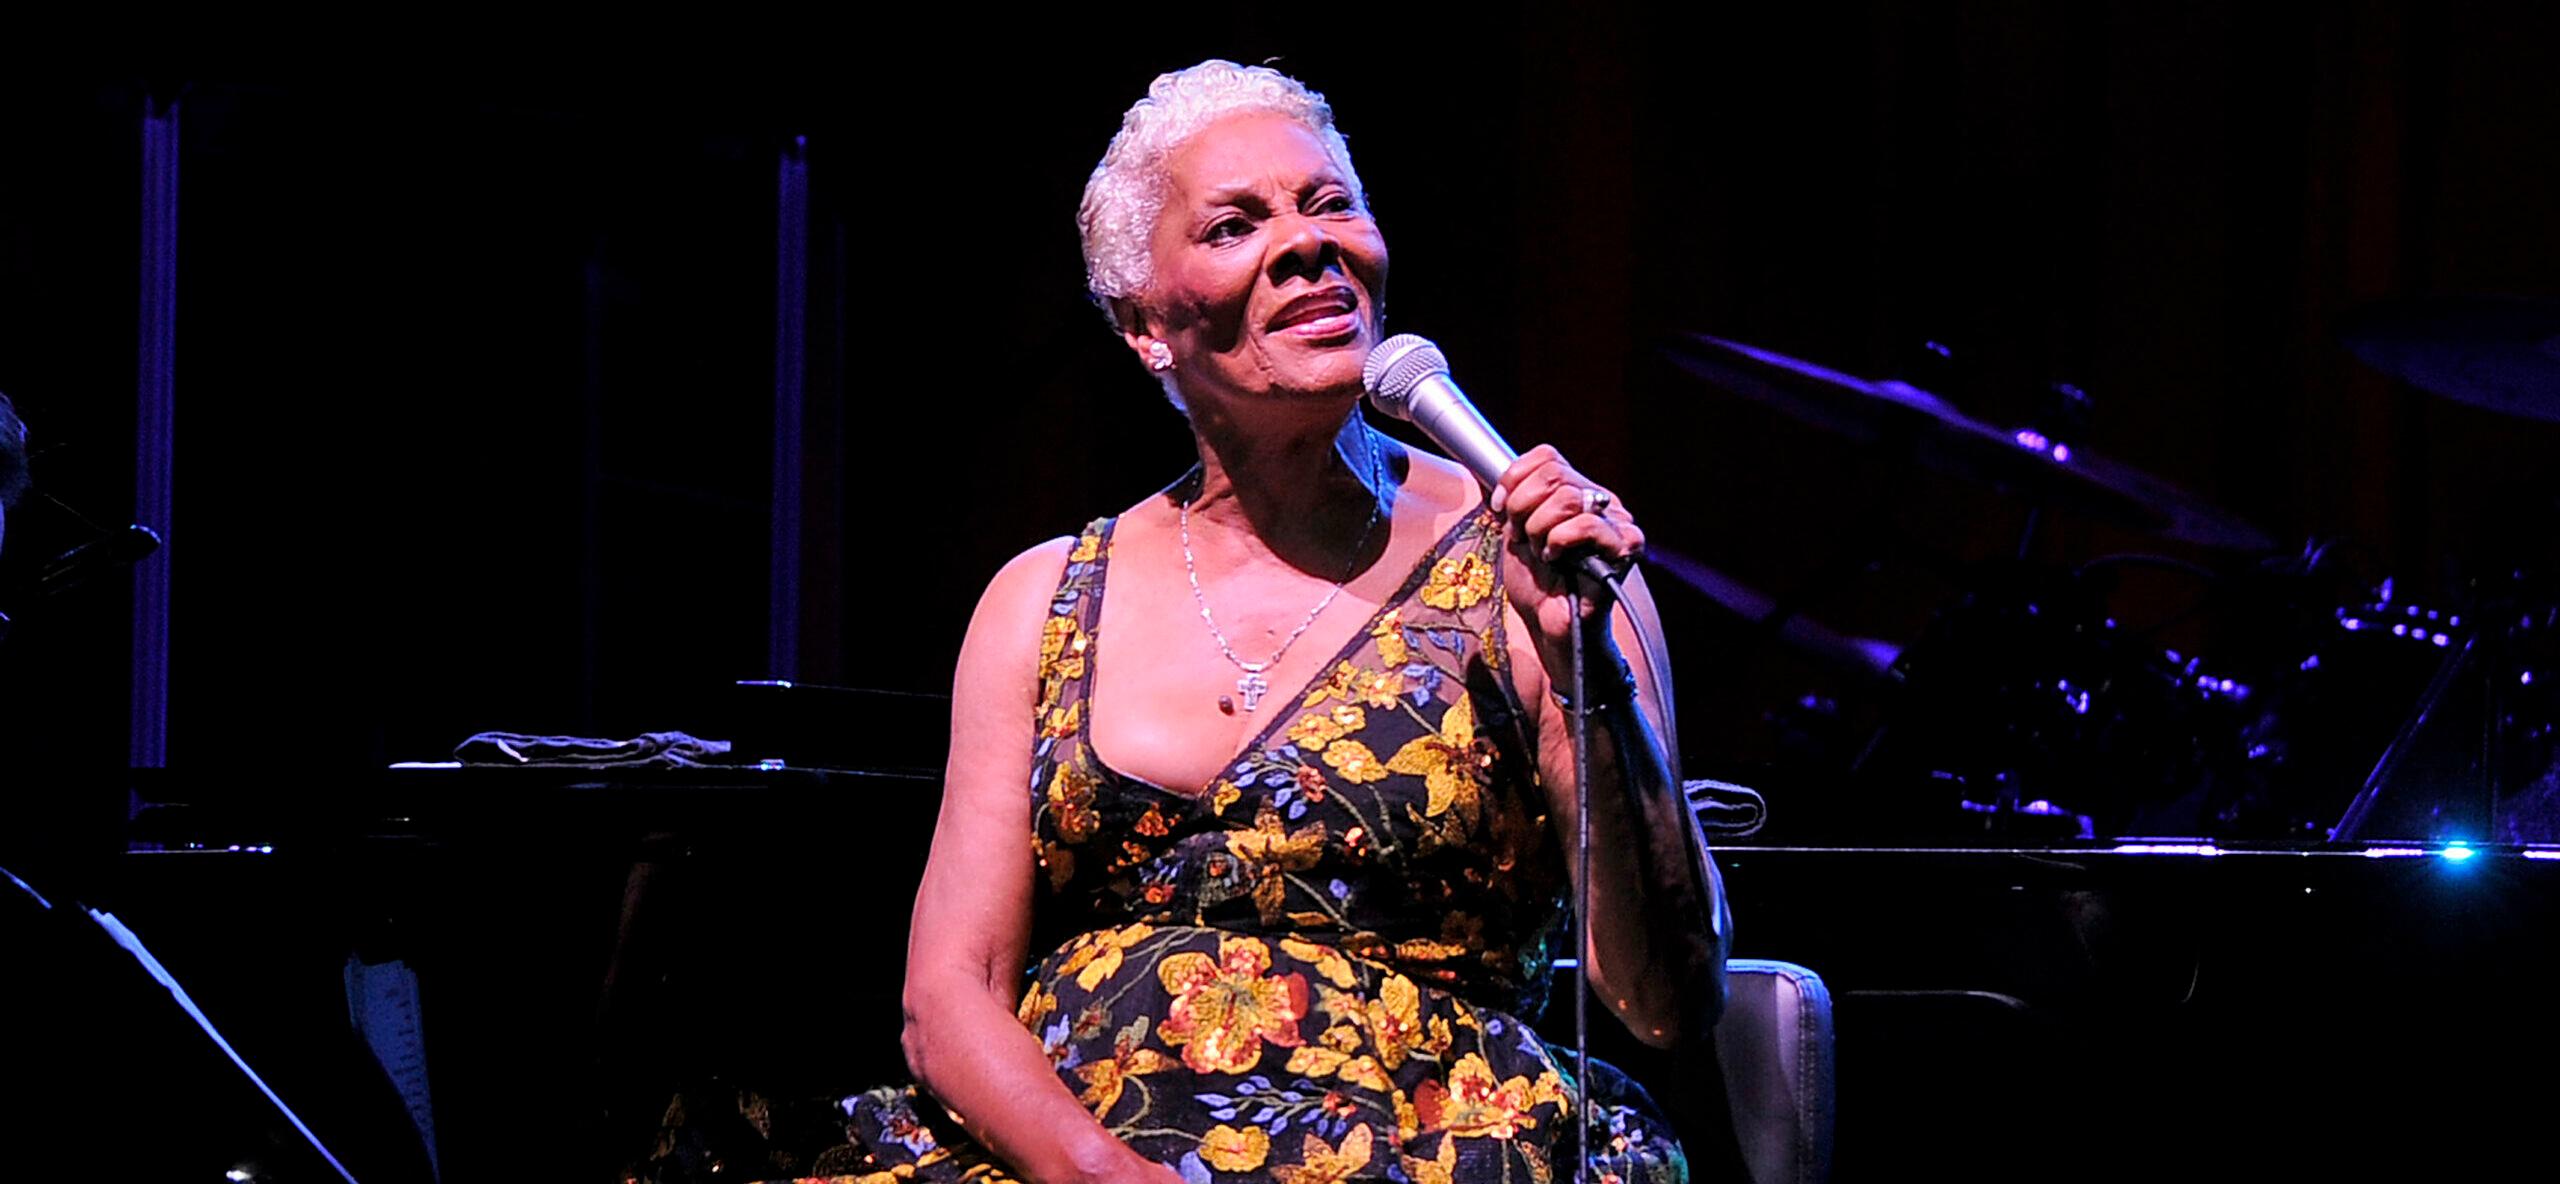 Fans Rally Around Dionne Warwick After She Cancels Show Over Medical Issue